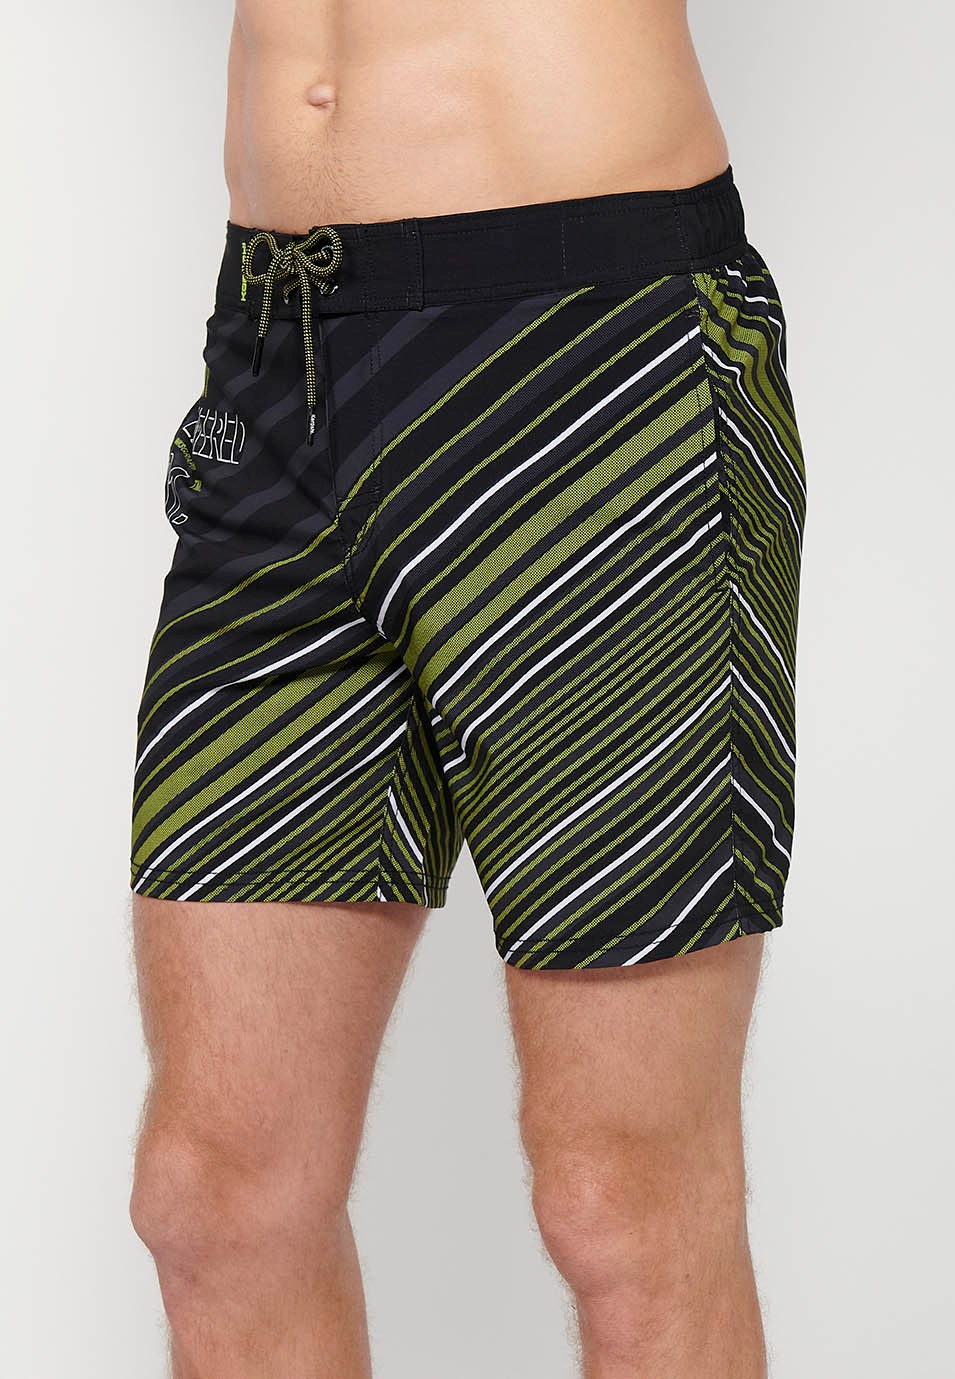 Printed short swimsuit with adjustable waist with drawstring and back pocket and one interior pocket in Lime Color for Men 1